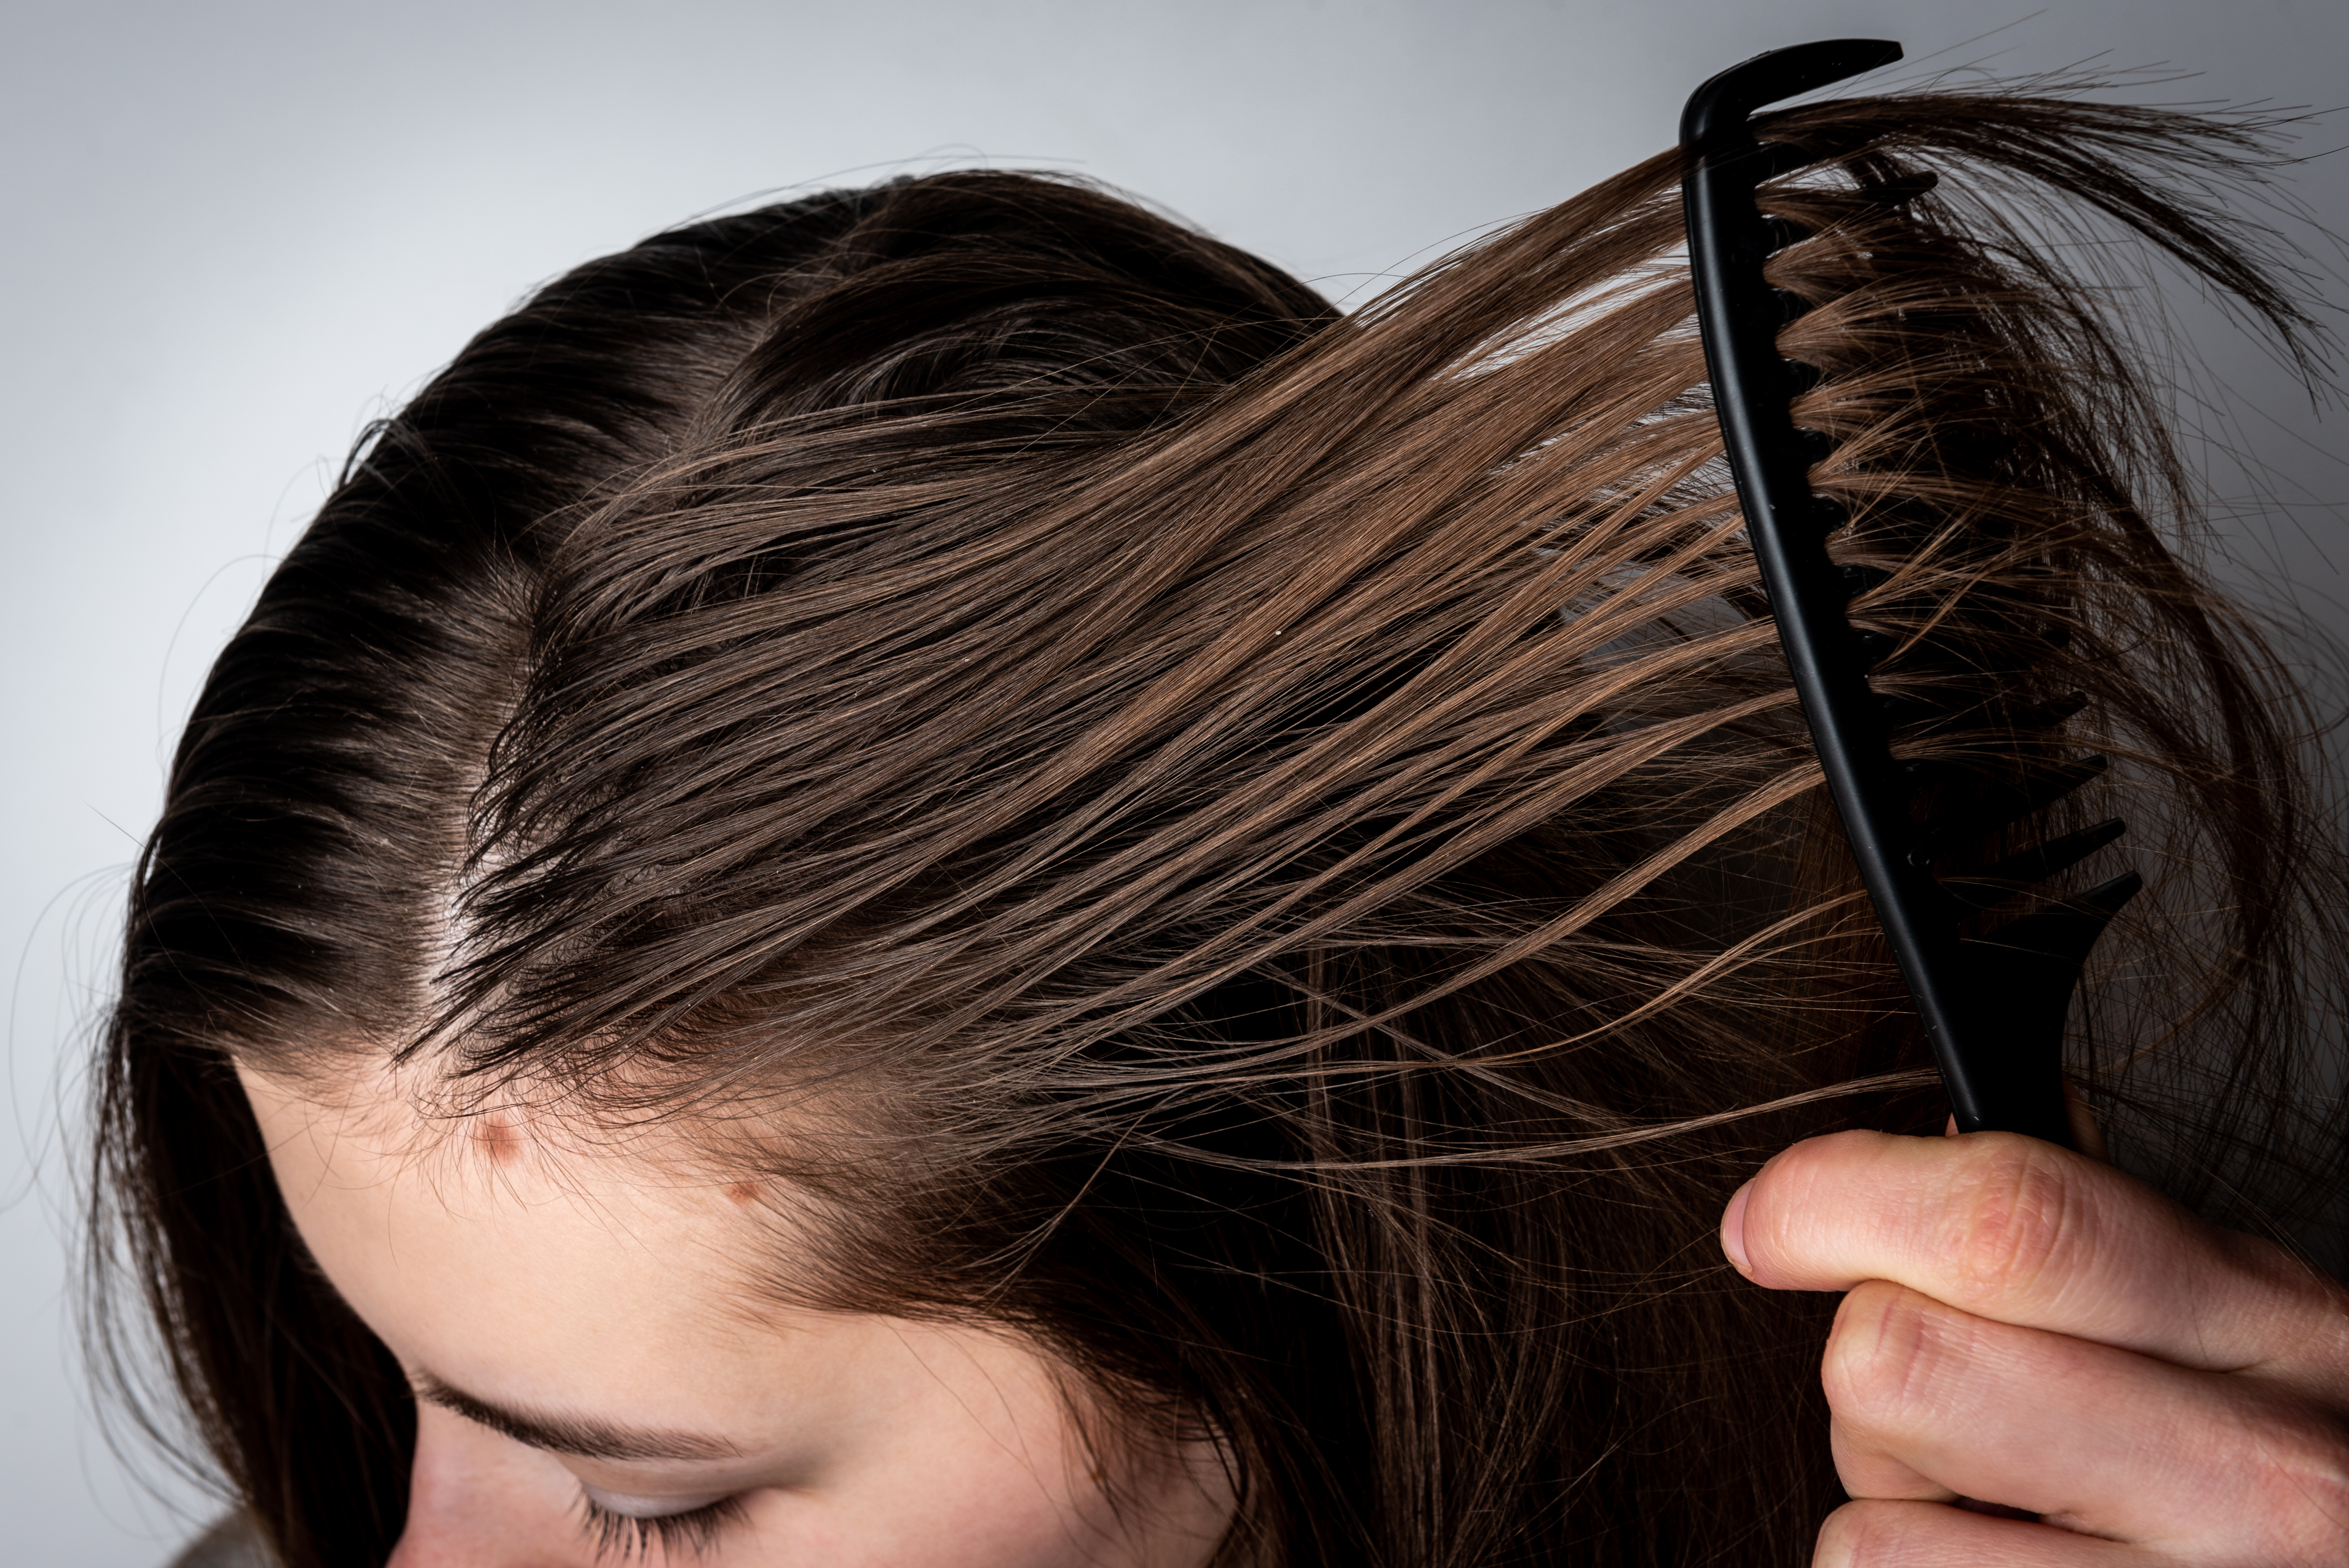 Dandruff and Hair Loss: Are They Connected